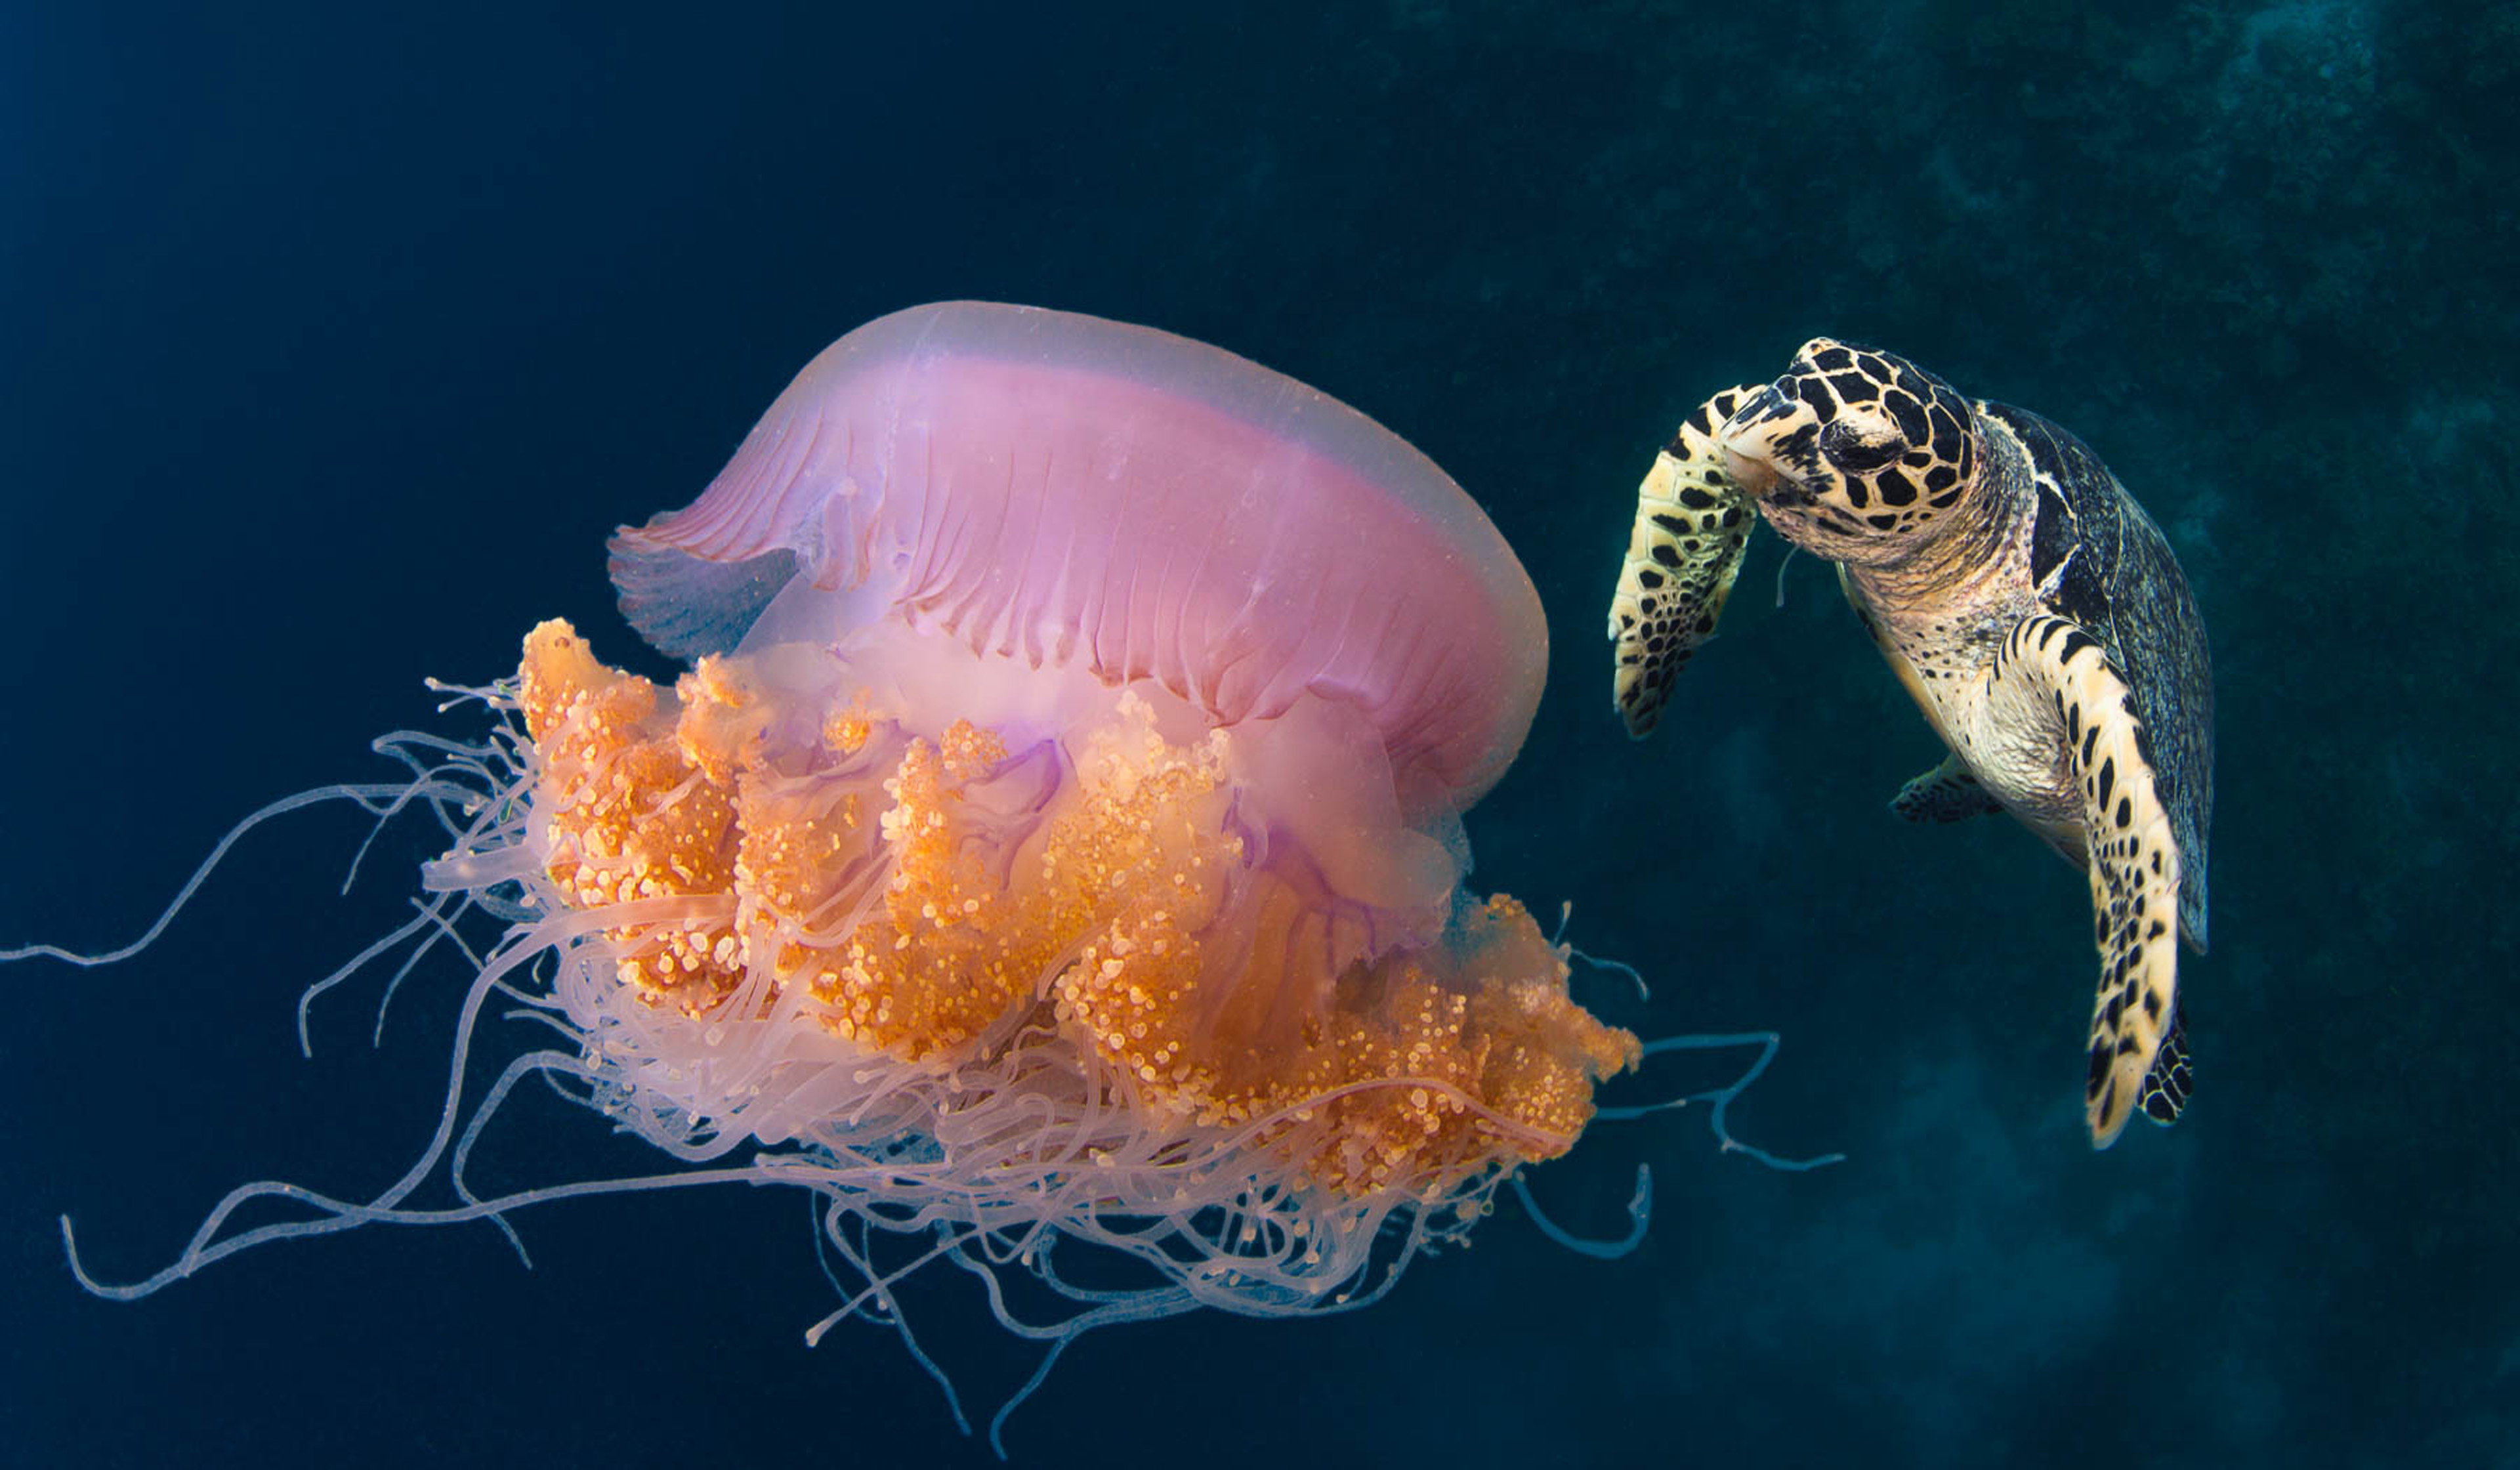 Jellyfish And Turtle Desktop Backgrounds Hd : Wallpapers13.com